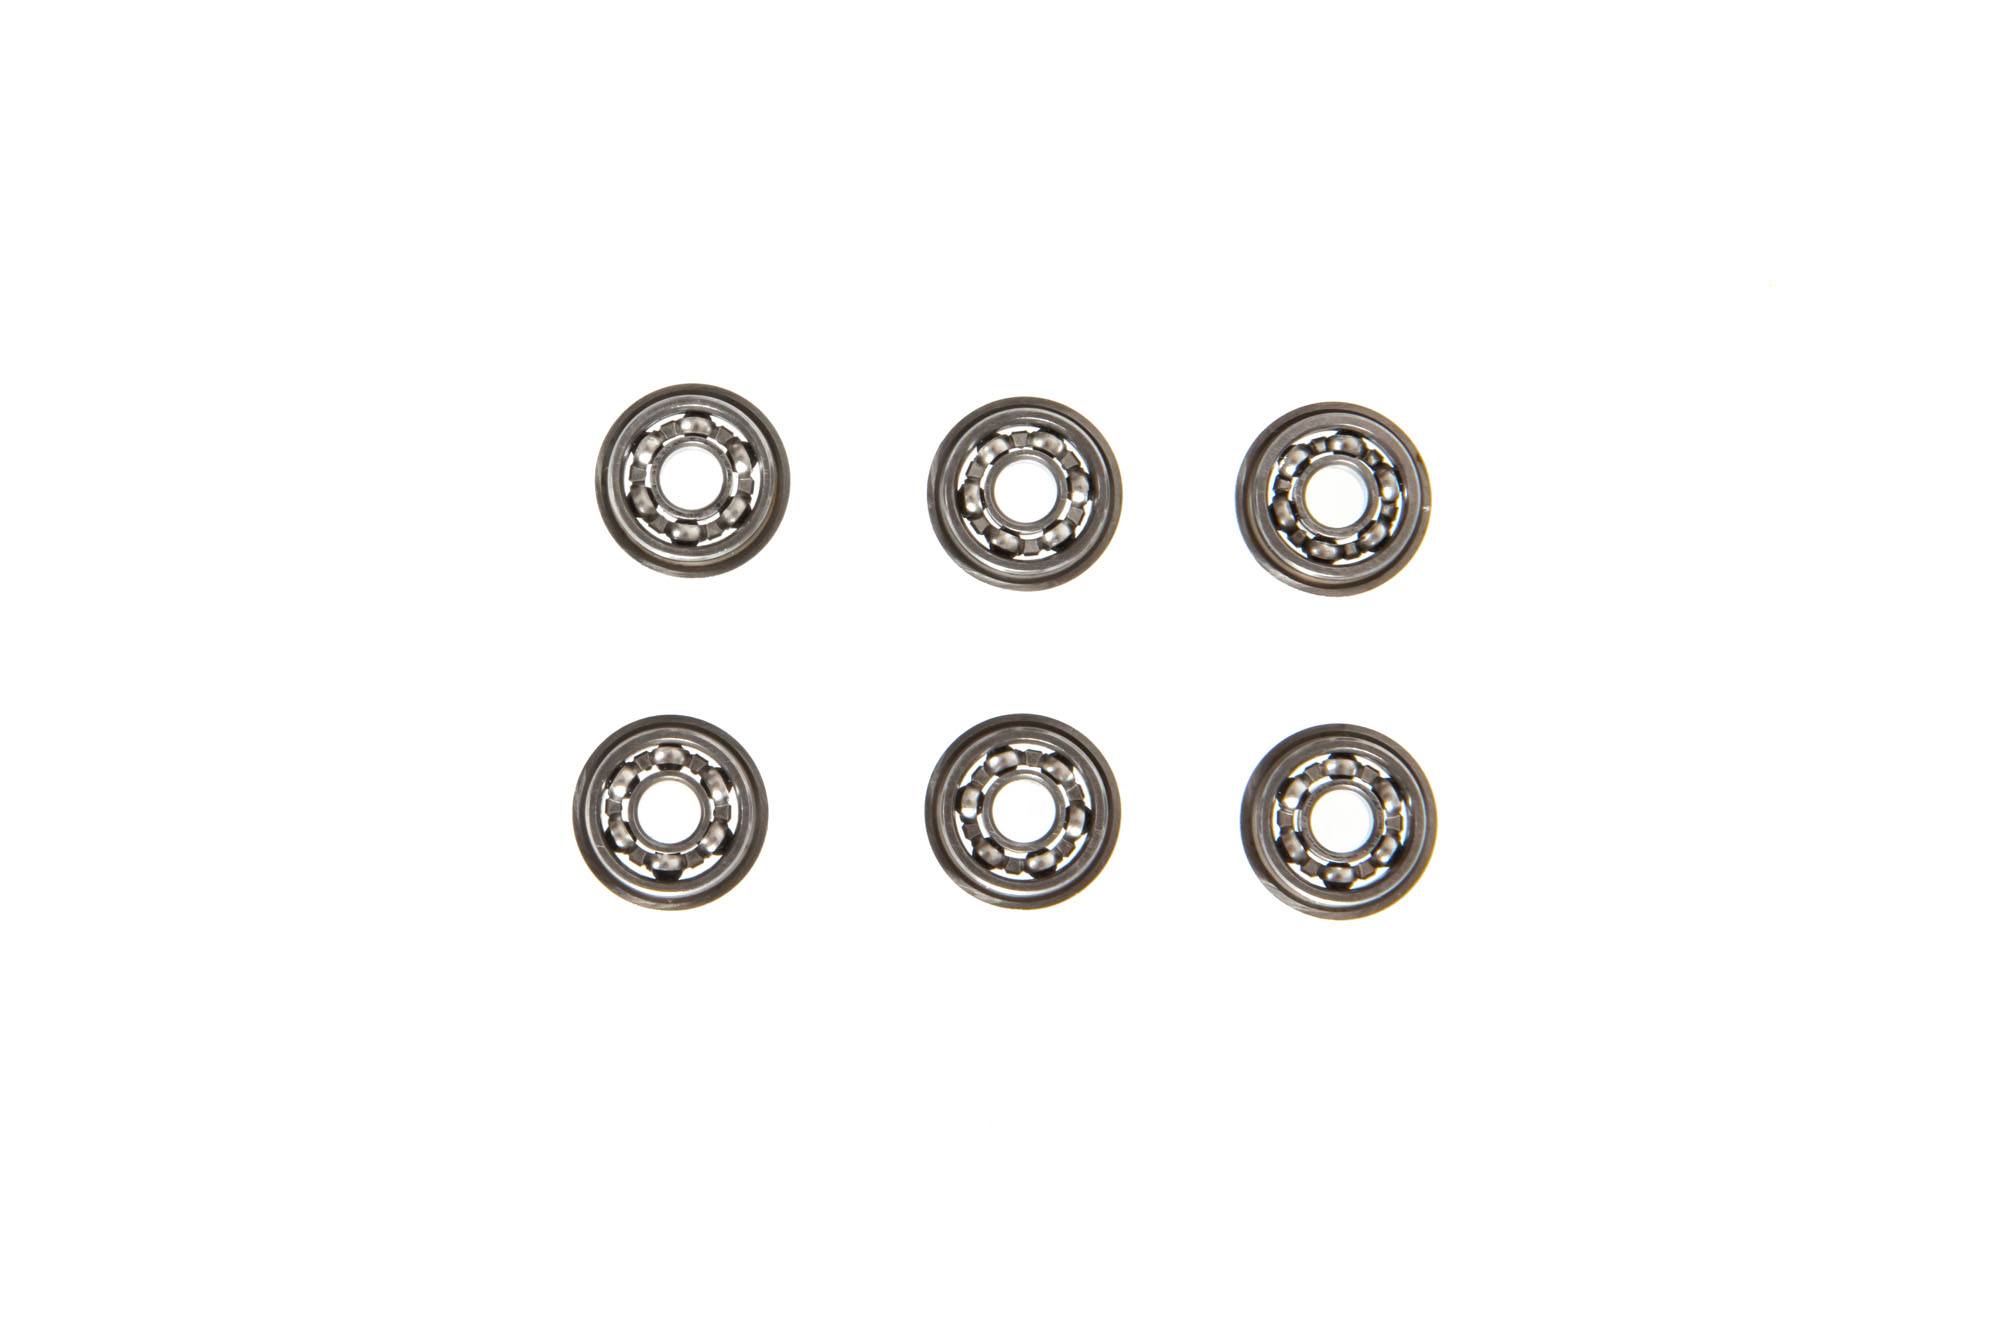 Set of 6 J-Caged Hybrid Ceramic 8mm Ball Bearings by Modify on Airsoft Mania Europe